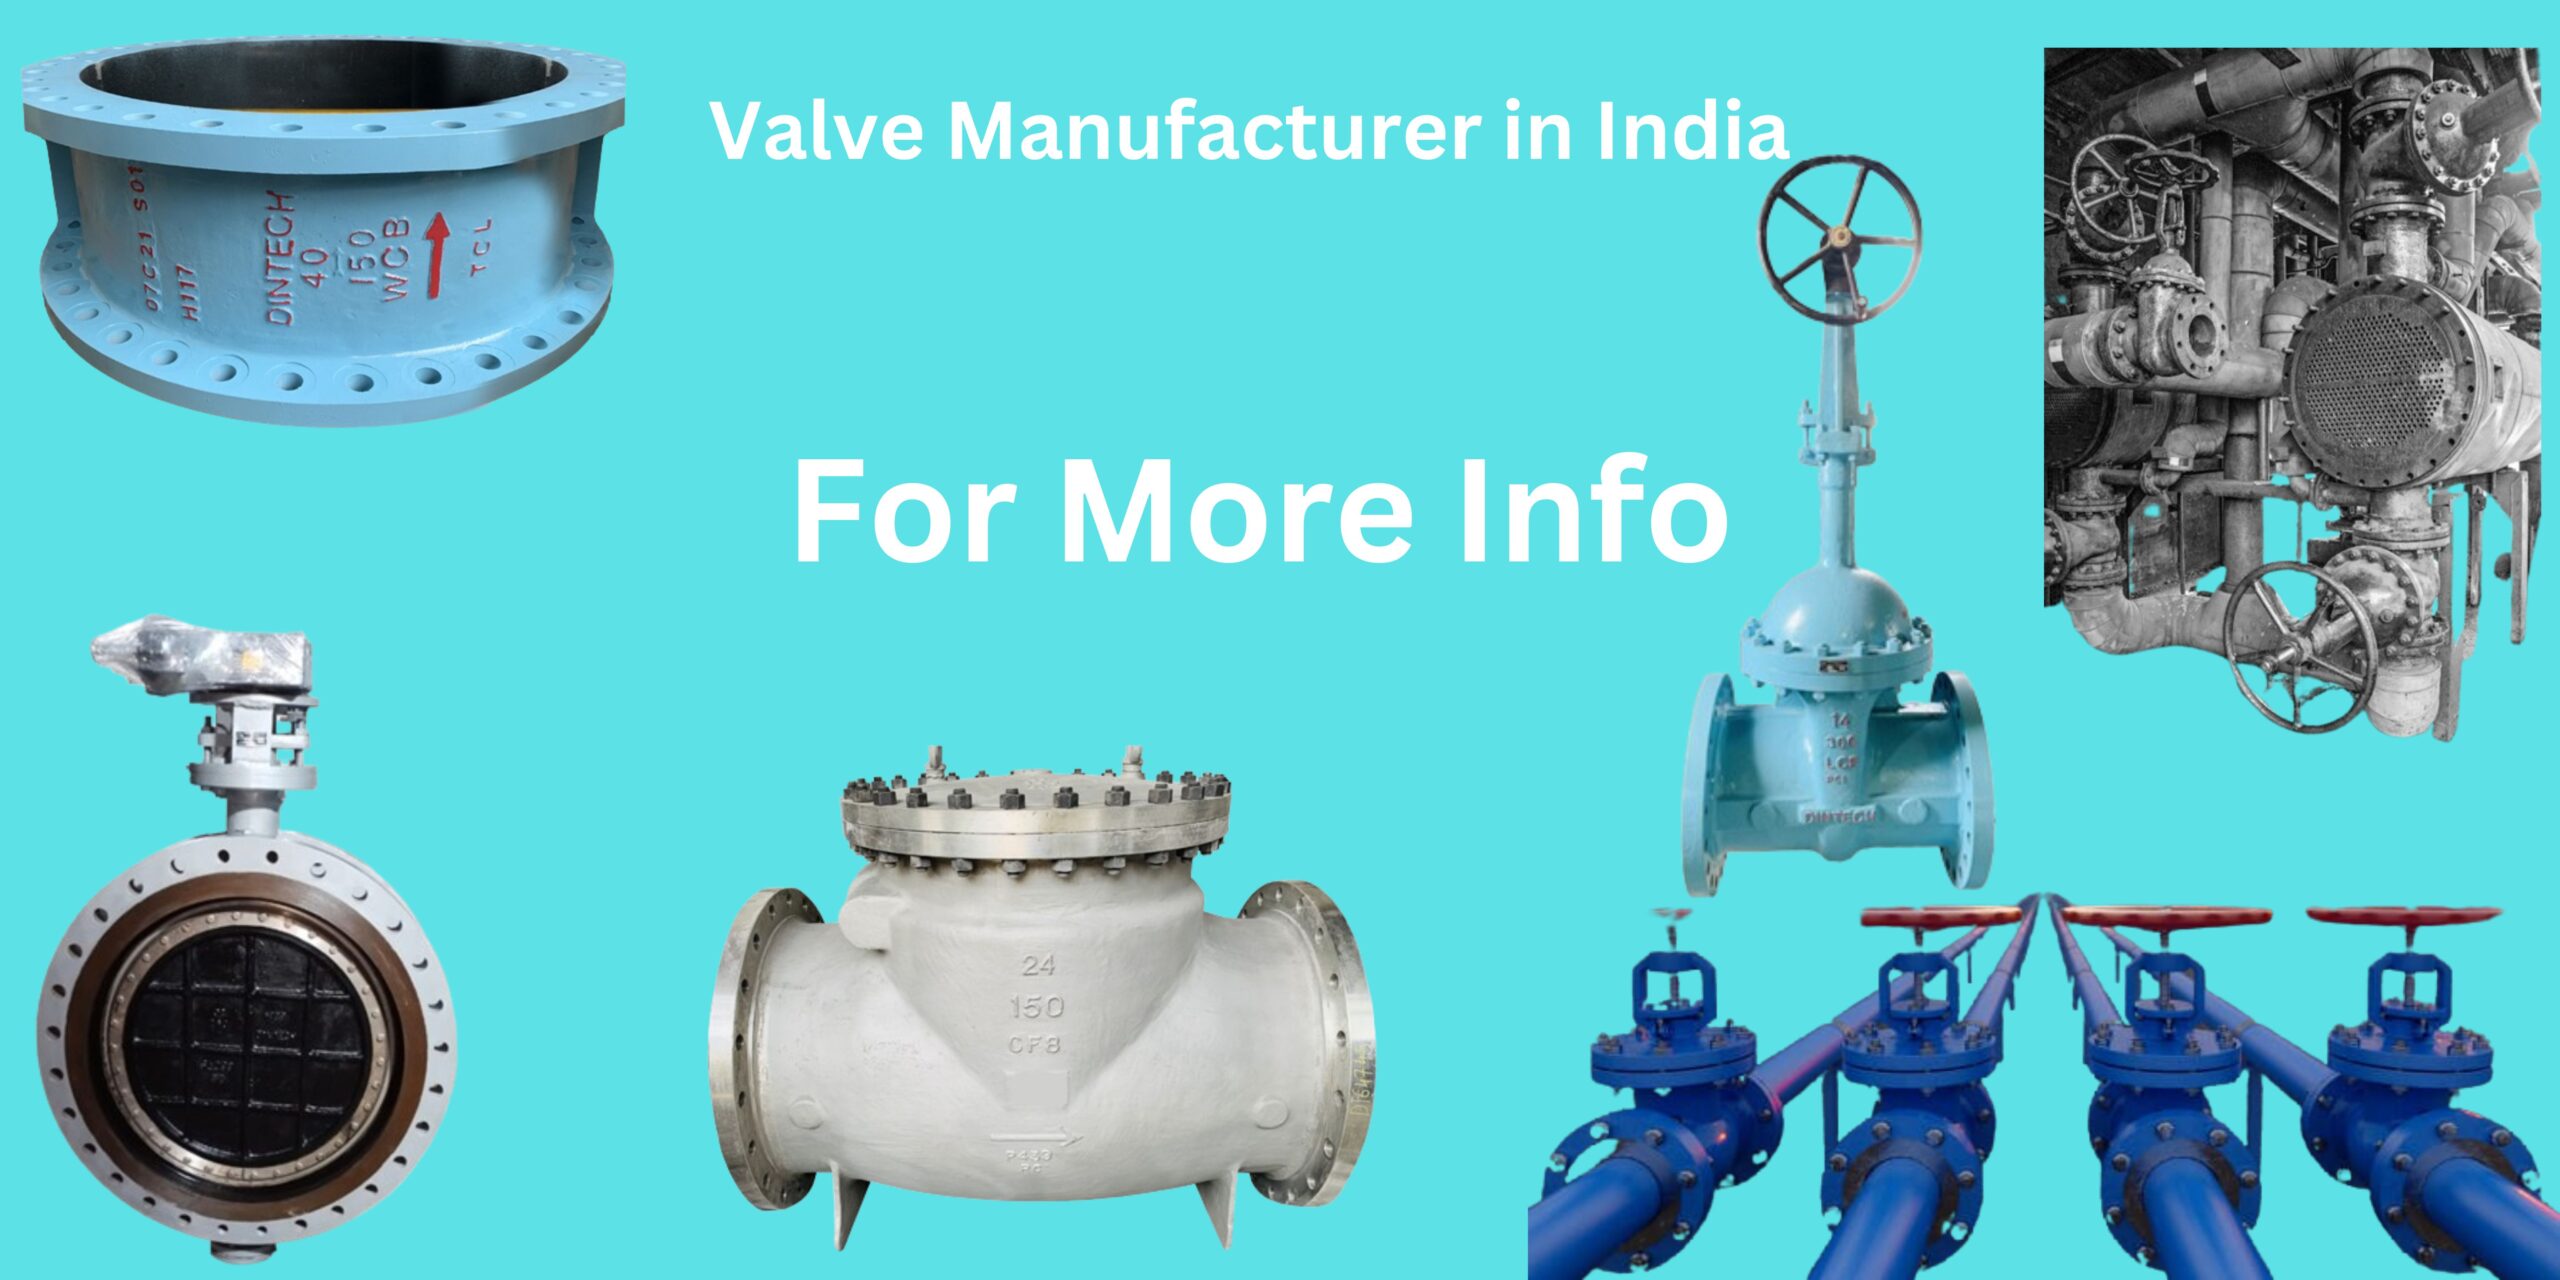 "Audco Valves, Spirax Forbes Marshall, Spirax Steam Traps, Leader Valves, Audco Ball Valves, L&T Valves, KSB Valves, Uni Klinger Valves, Utam Make Valves, Utam Make Valves, Disc Check Valves, Industrial Valves, Industrial Globe Valves, Slurry Valves, Fitting Accessories, Gate Valves, Strong Brand Globe Valve, Strong Brand Plug Valves, Forbes Marshal Valves, Plug Valves, Forbes Marshal Steam Traps, Piston Valve, KLINGER Make Piston Valve, Trunnion Mounted Ball Valves Manufacturers, Dealers, Suppliers, Traders, Wholesalers and Exporters in India"